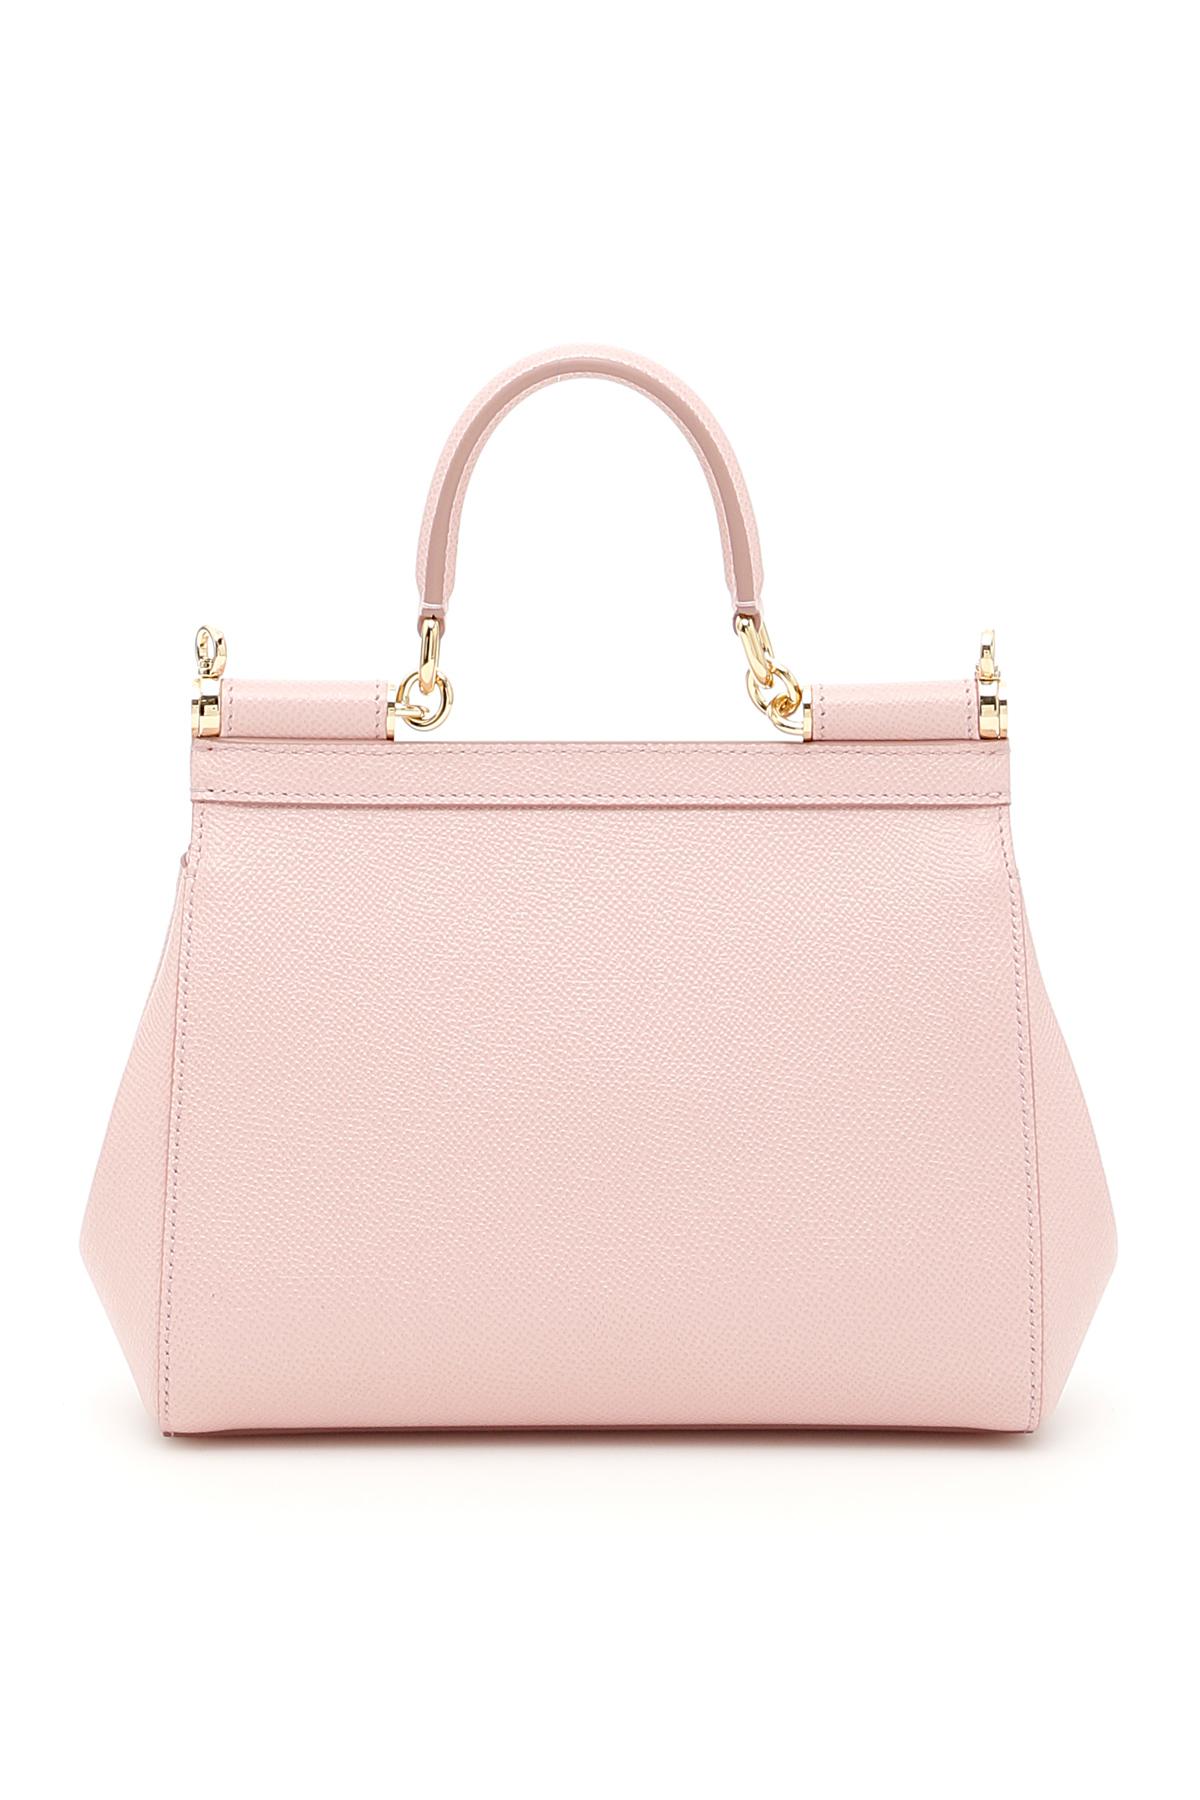 Dolce & Gabbana Leather Small Sicily Bag in Pink & Purple (Pink 